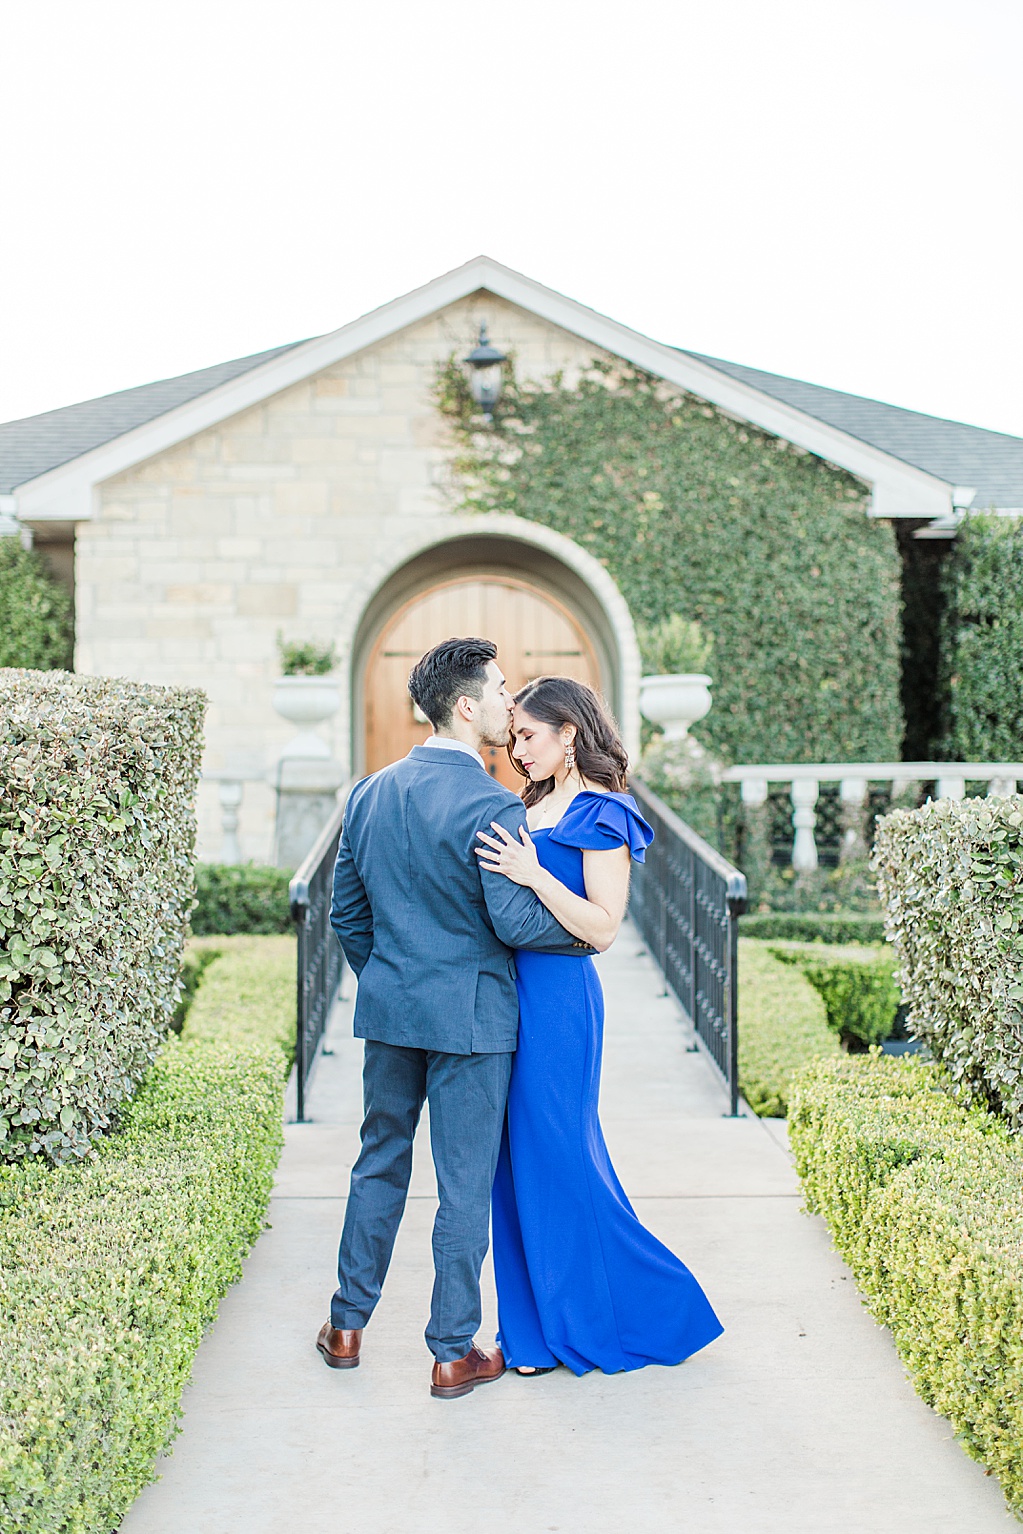 The Gardens of Cranesbury View New Braunfels Engagement Photos by Allison Jeffers Wedding Photography 0075